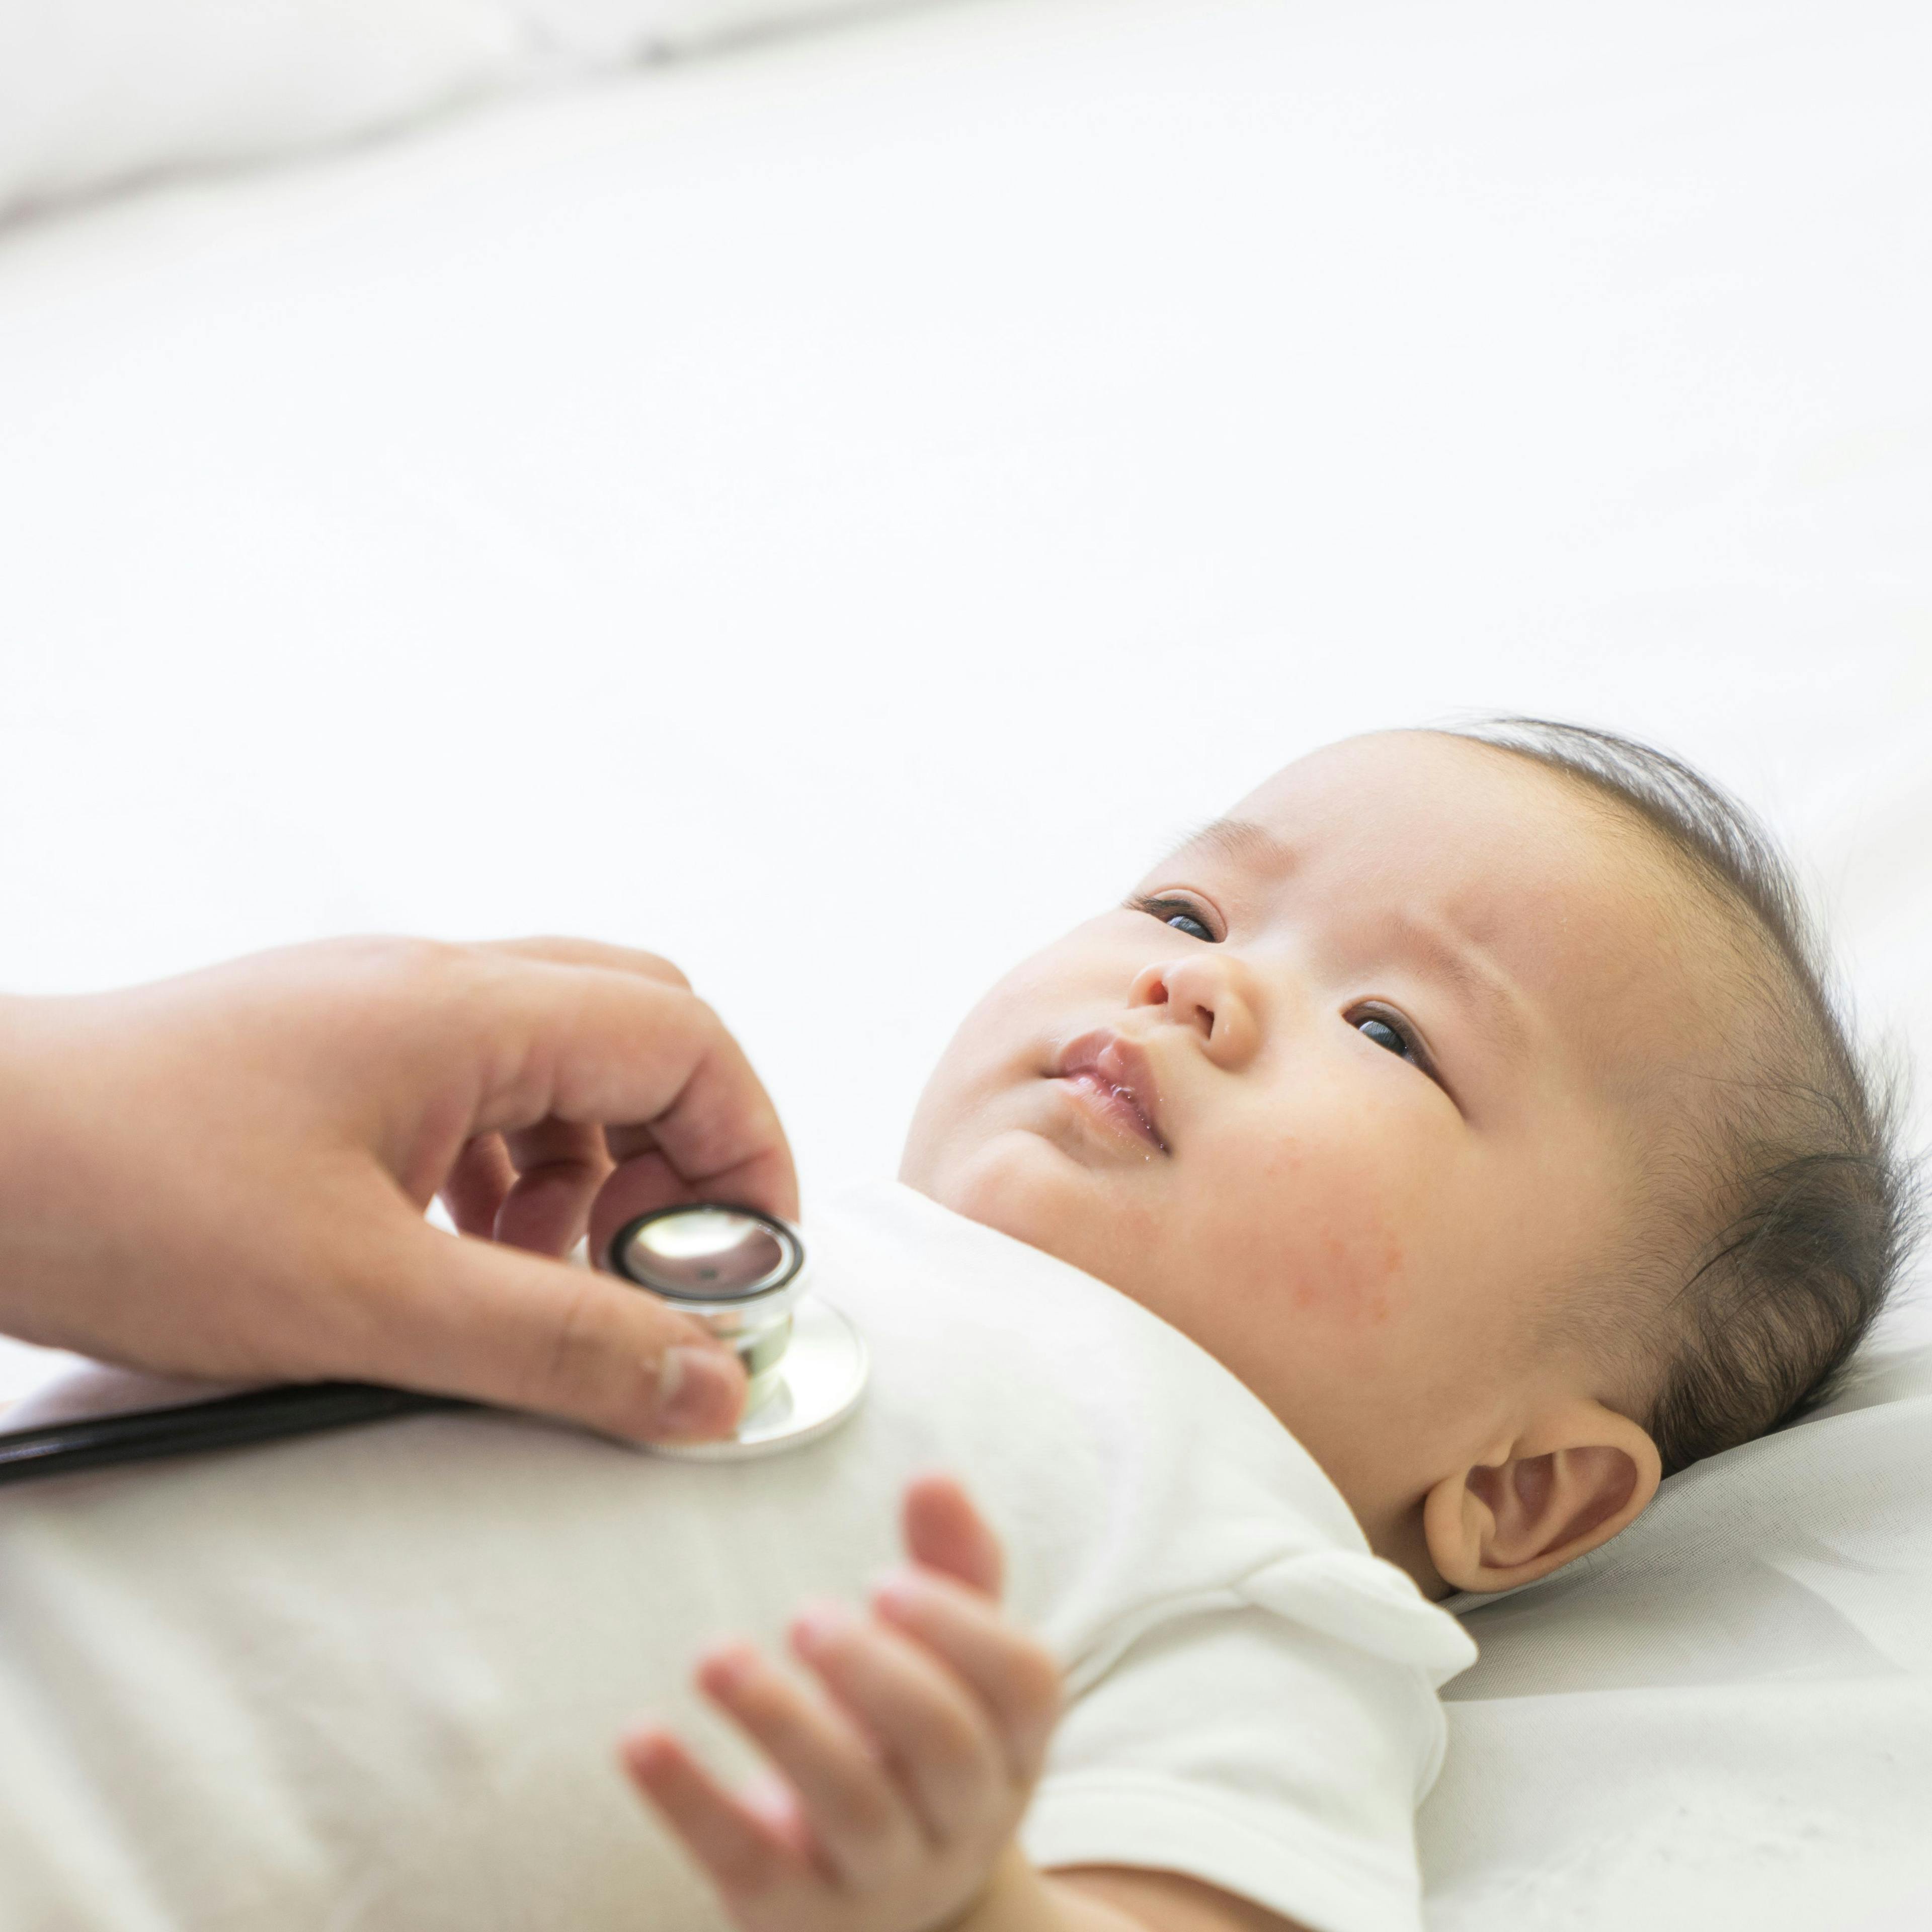 Study Finds 3 Monoclonal Antibodies Reduce RSV Infections in High-Risk Infants, Children 